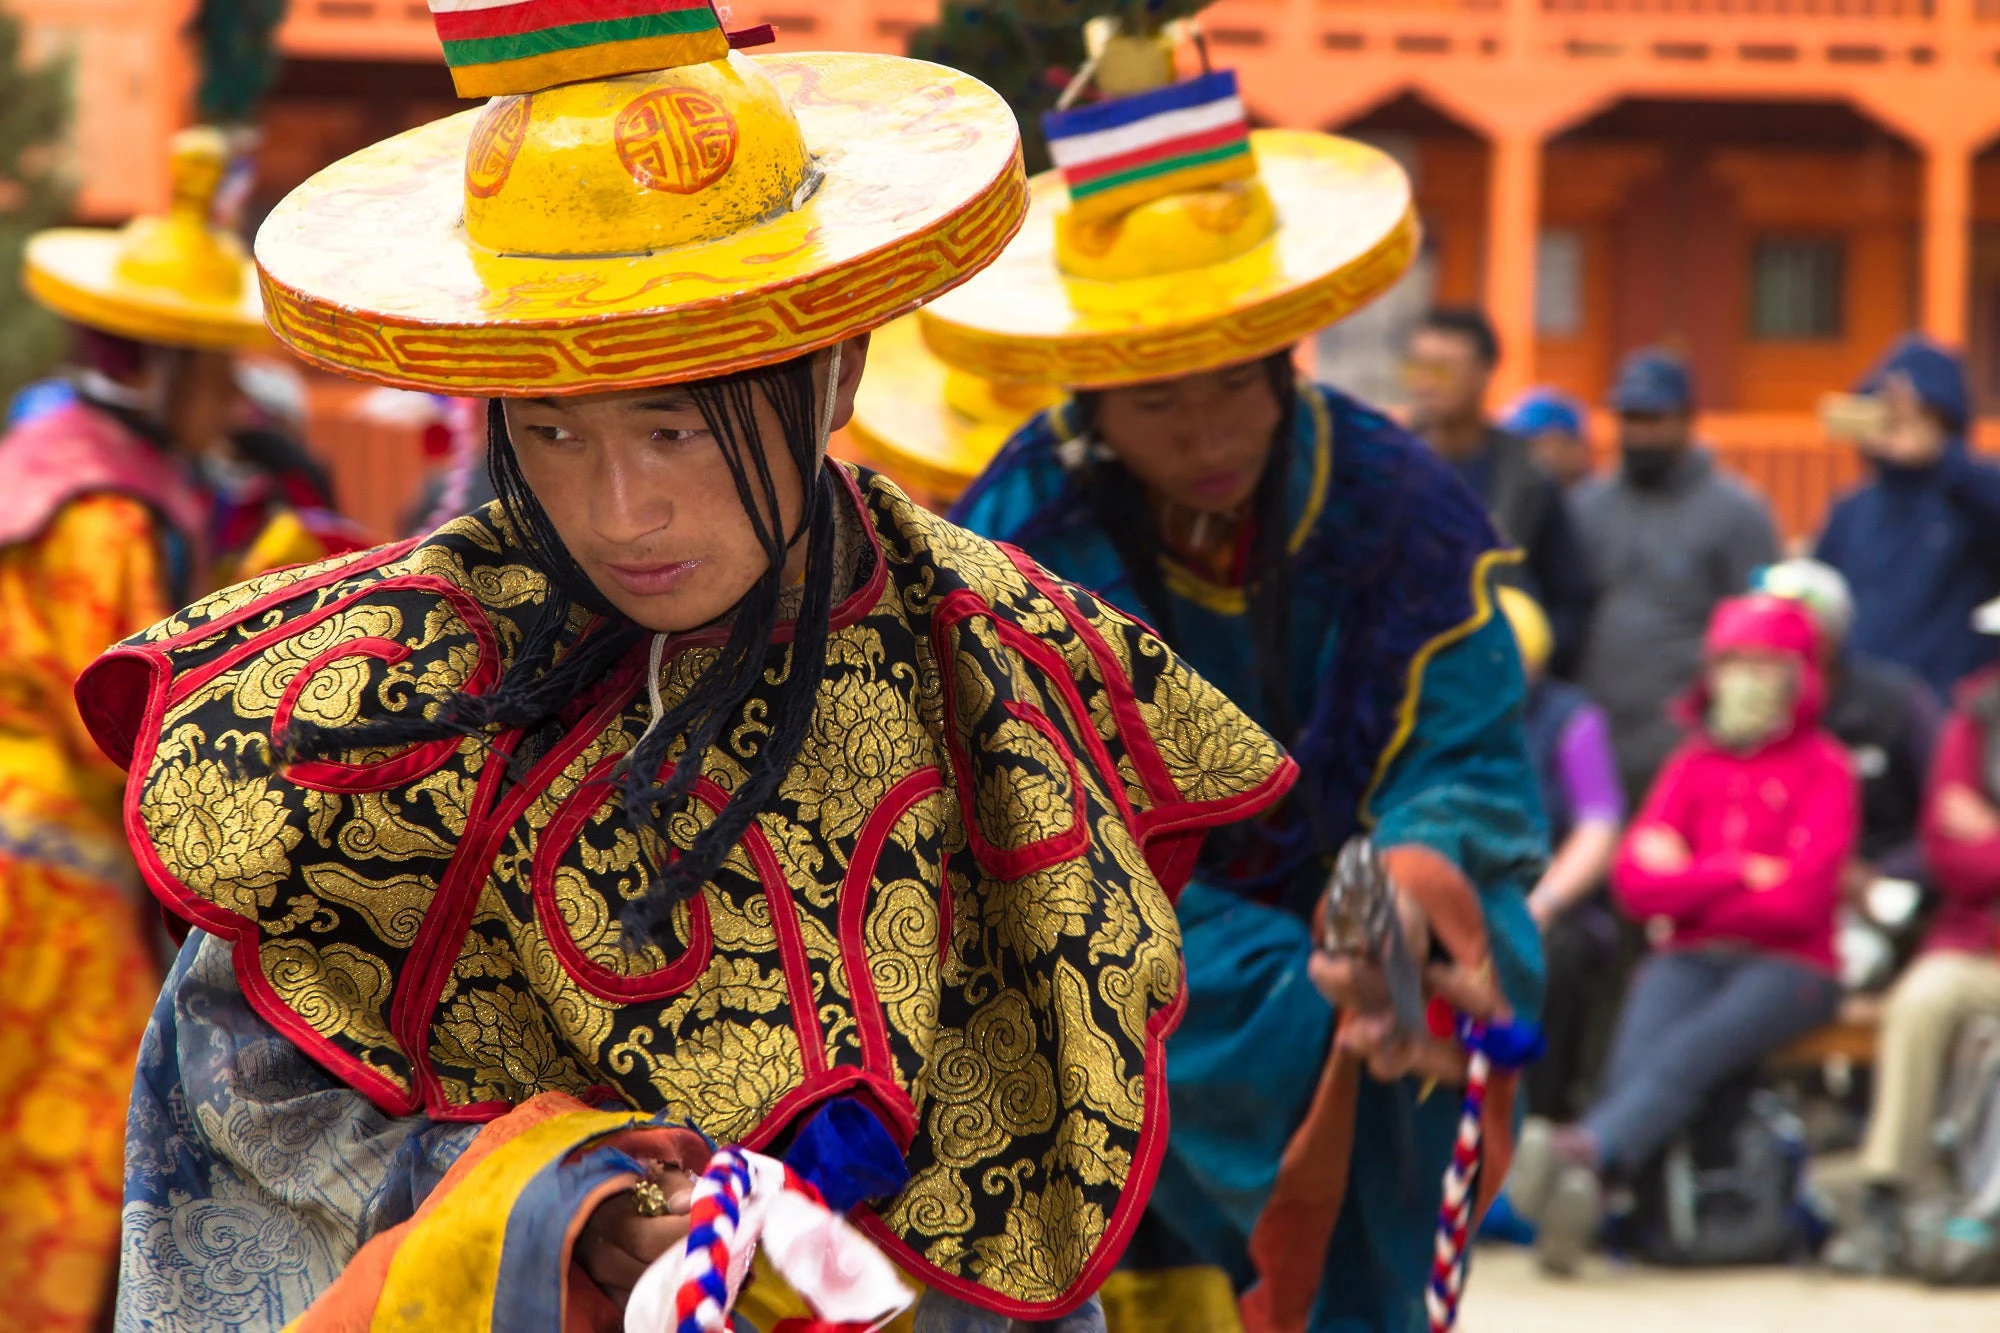 Monks perform a religious masked mystery dance of Tibetan Buddhism during the Tiji festival in monastery at Lo-Manthang, Nepal. Photo:Nowamhere / Shutterstock.com